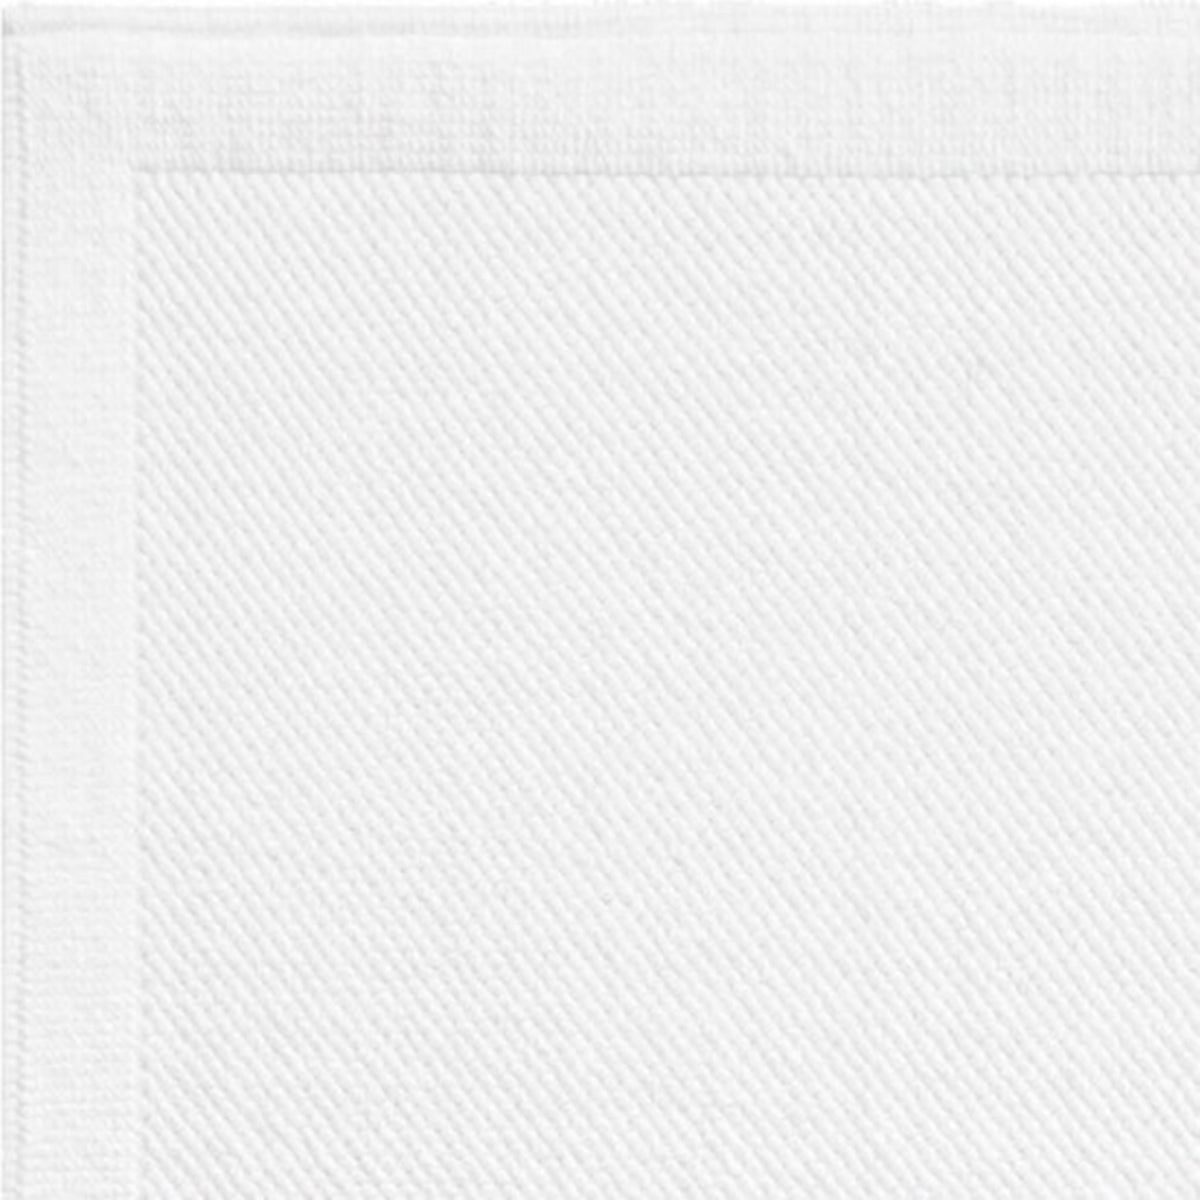 Swatch Sample of Graccioza Pearls Bath Towels and Rugs in Color White